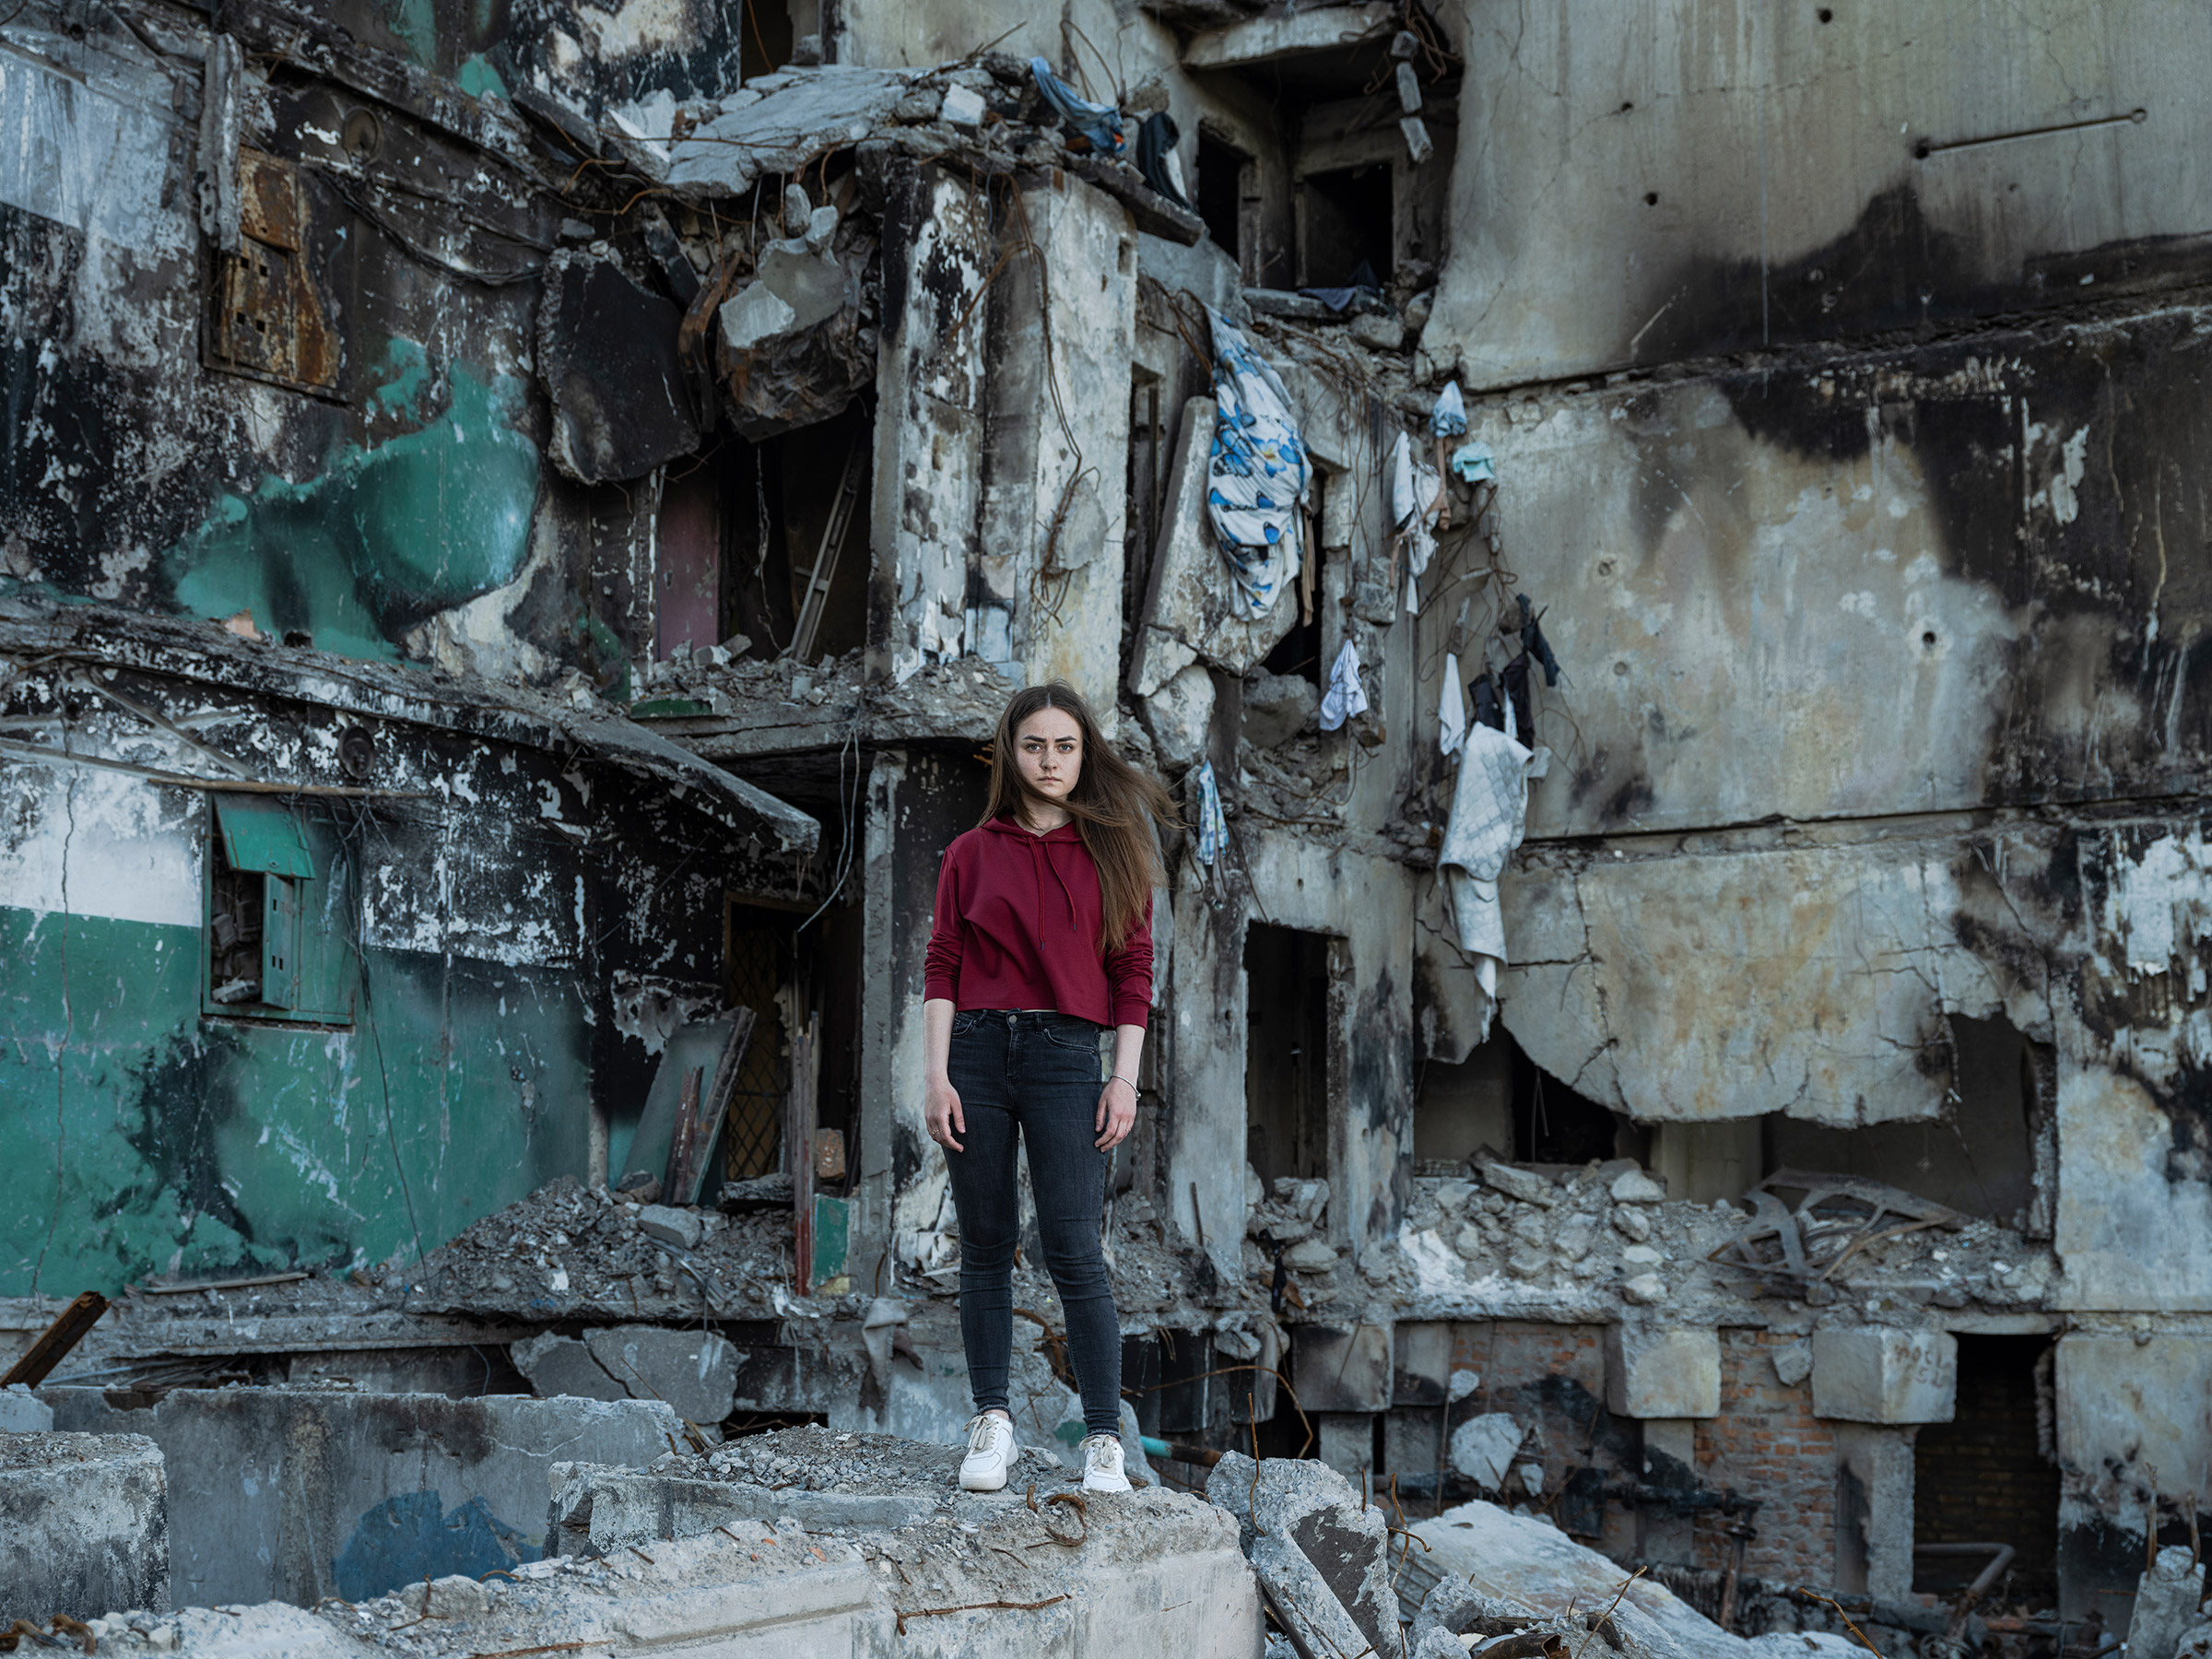 Katya Baranivska, 22, standing in front of the destroyed building in Borodyanka, Ukraine, where her family's apartment used to be before it was destroyed by a Russian bombing. (Sasha Maslov—INSTITUTE)